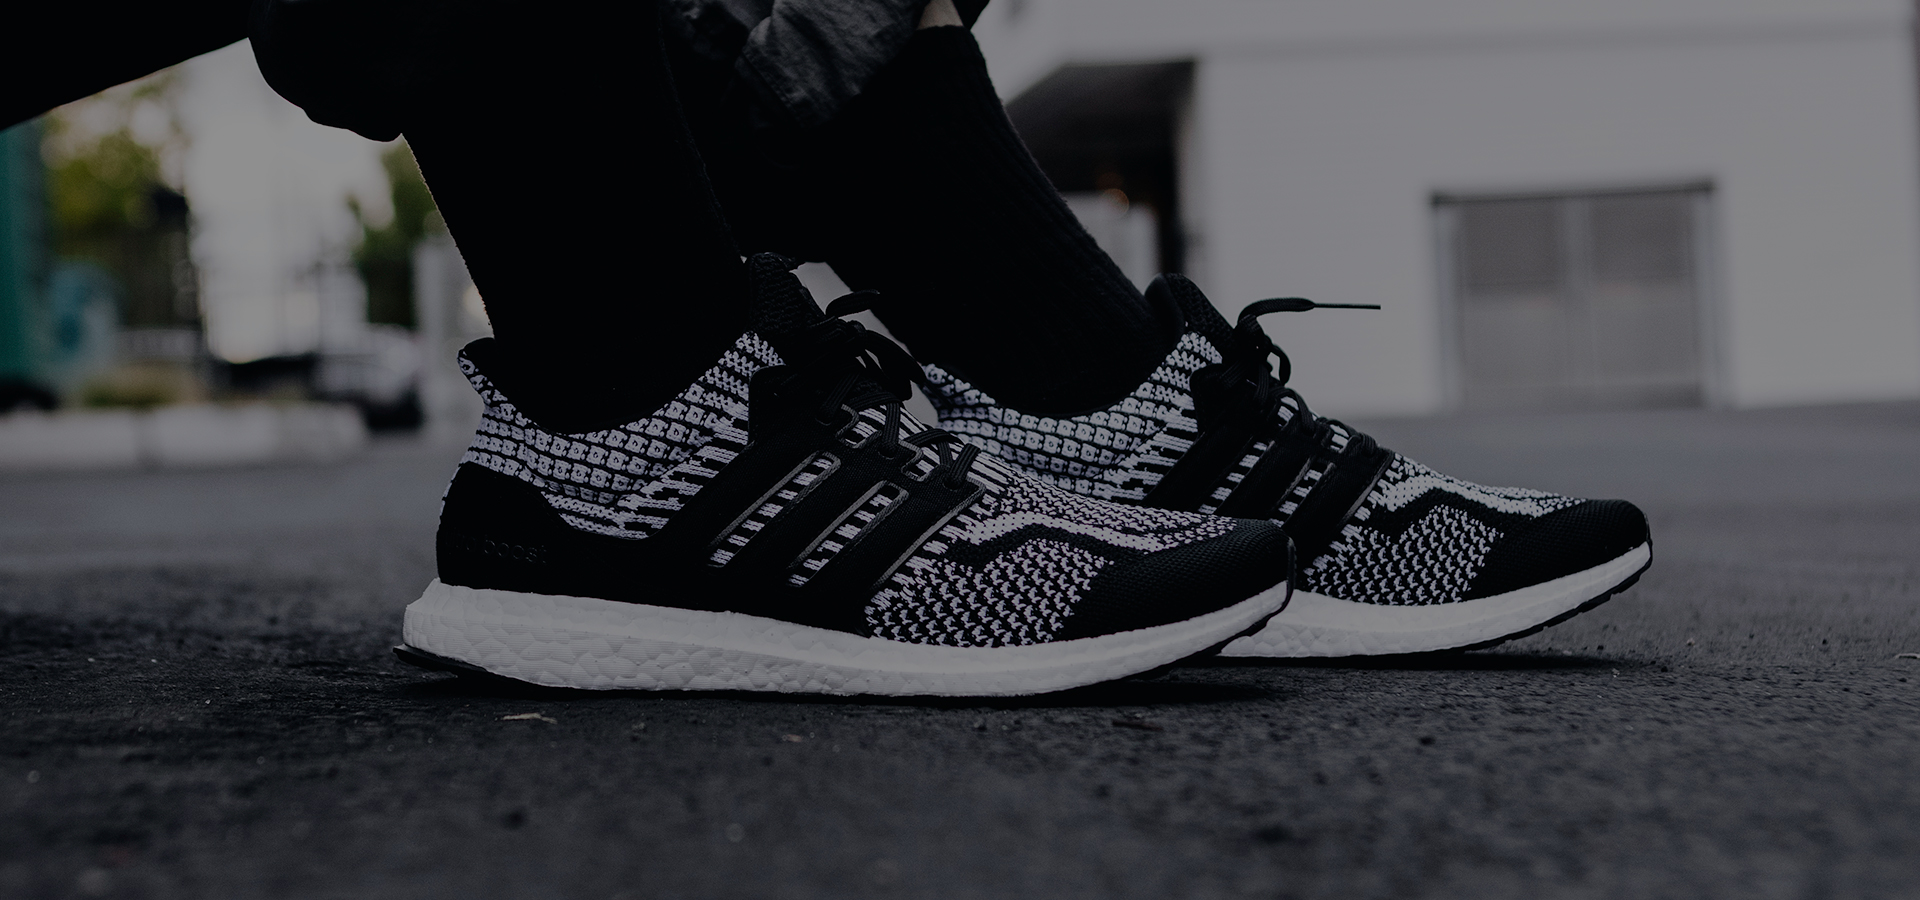 adidas boost shoes images